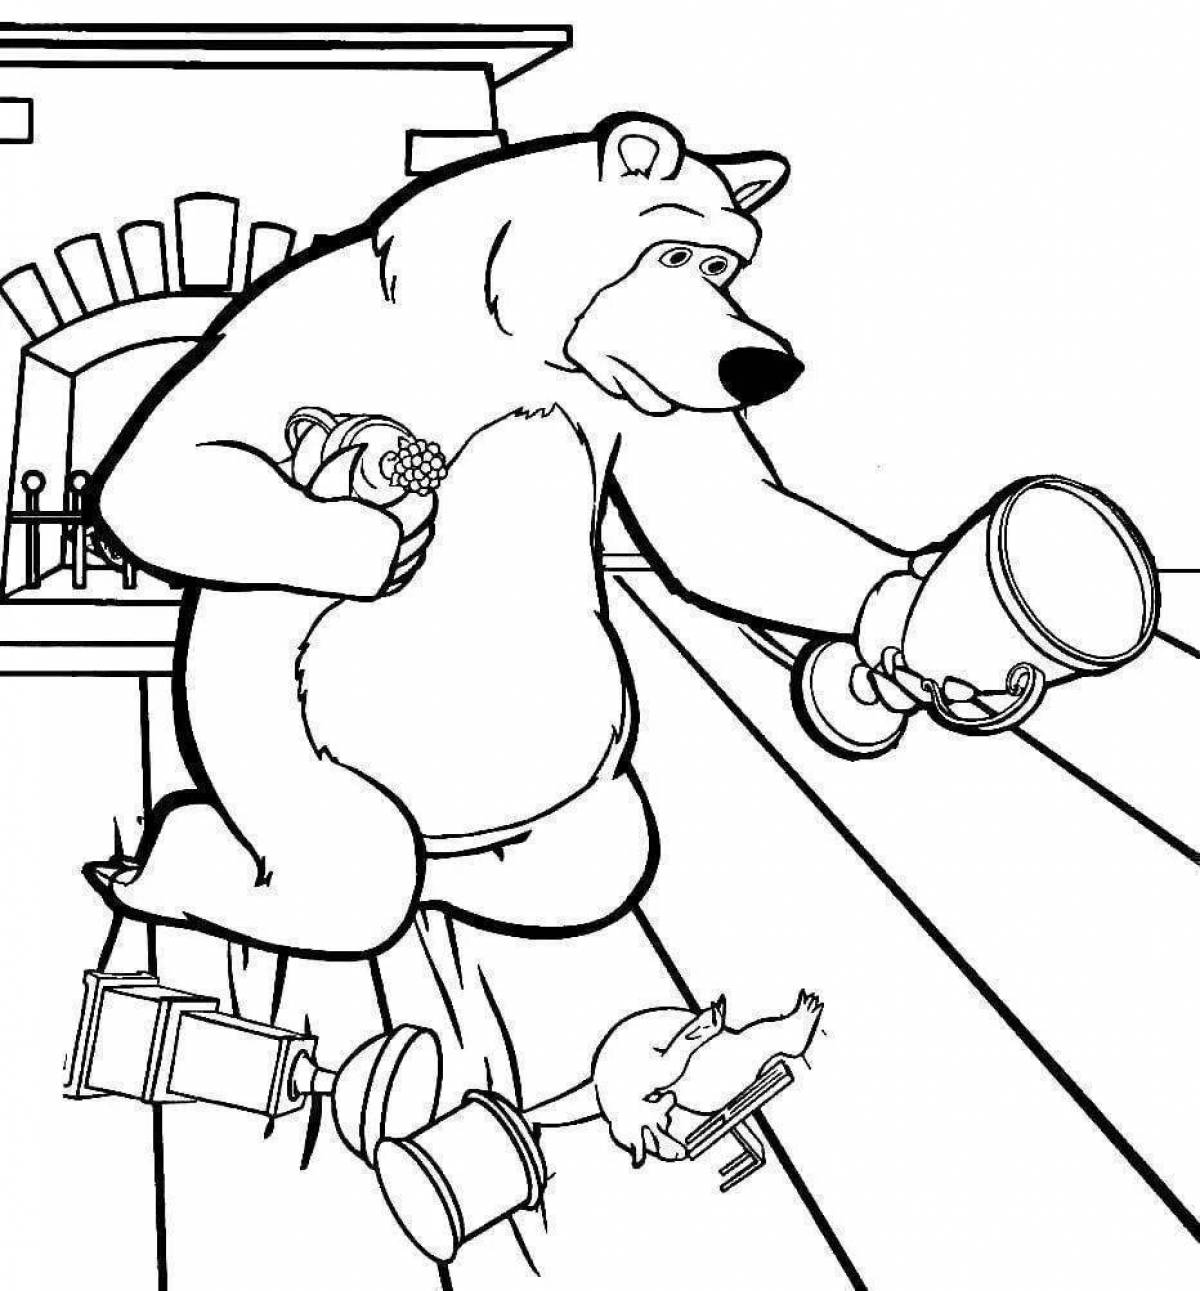 Fabulous Masha and the Bear coloring pages for kids